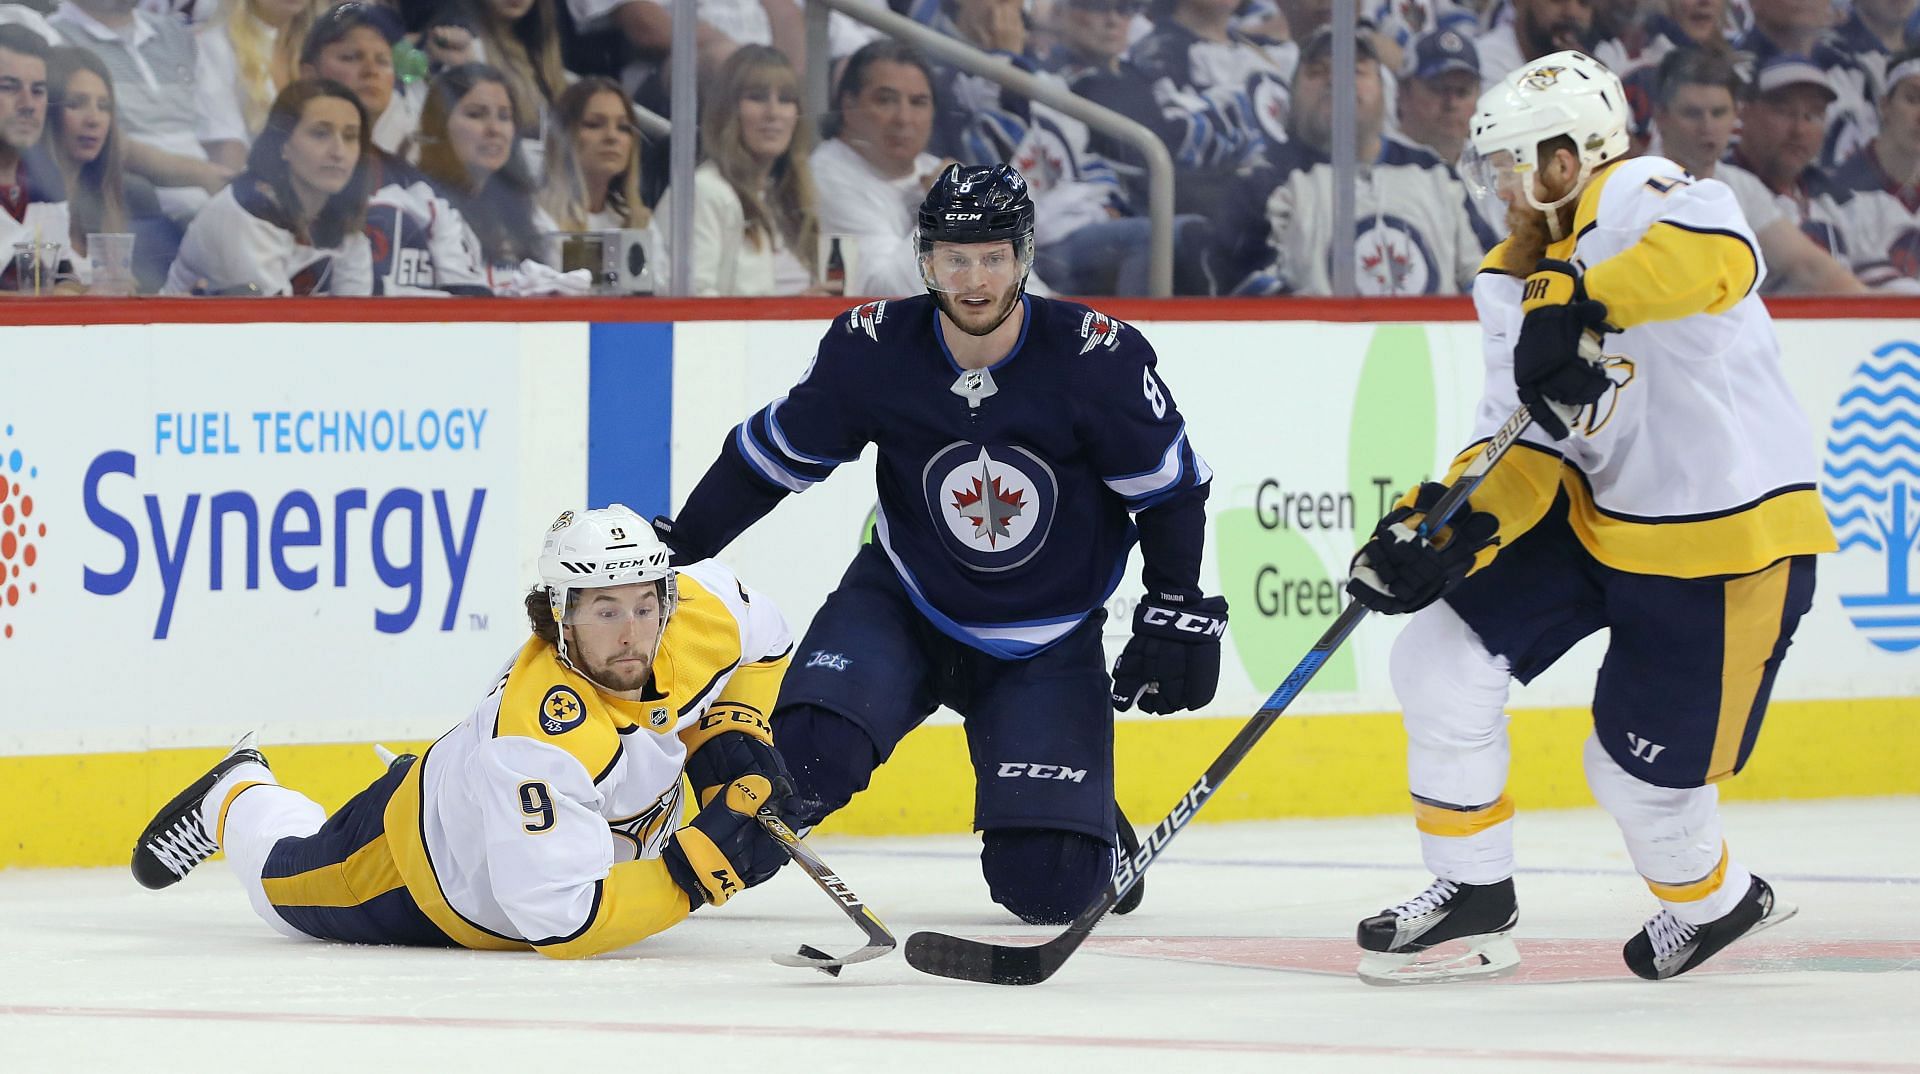 Winnipeg Jets vs Nashville Predators How and where to watch NHL live streaming on TV, channel list and more